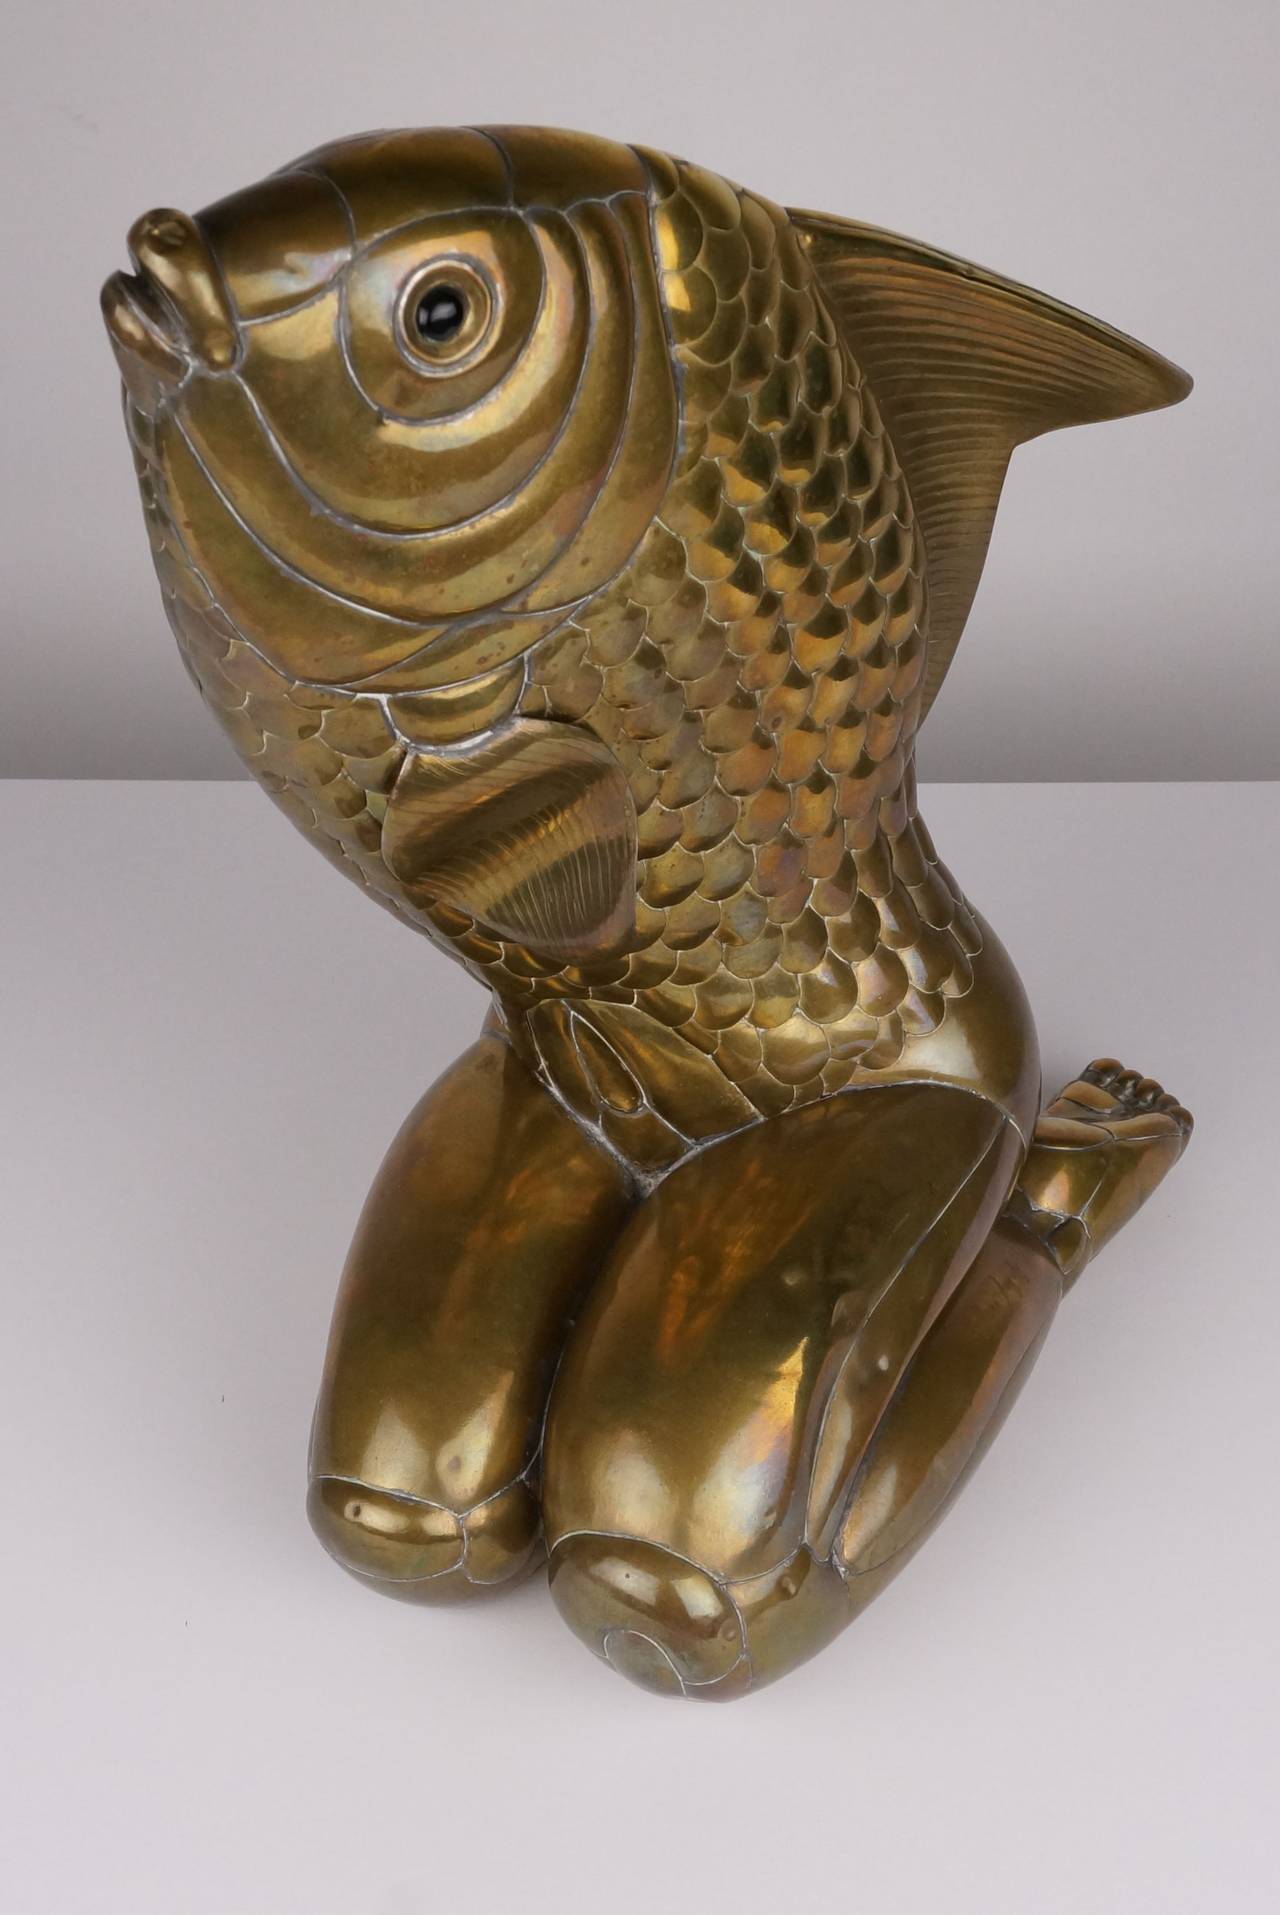 This Surrealist sculpture created in brass is depicting a female form with the head of a fish and was created in the 1970s by the artist Mano Gonzalez. It is signed Mano Gonzalez 6/100.

Gonzalez might have taken inspiration from the painting